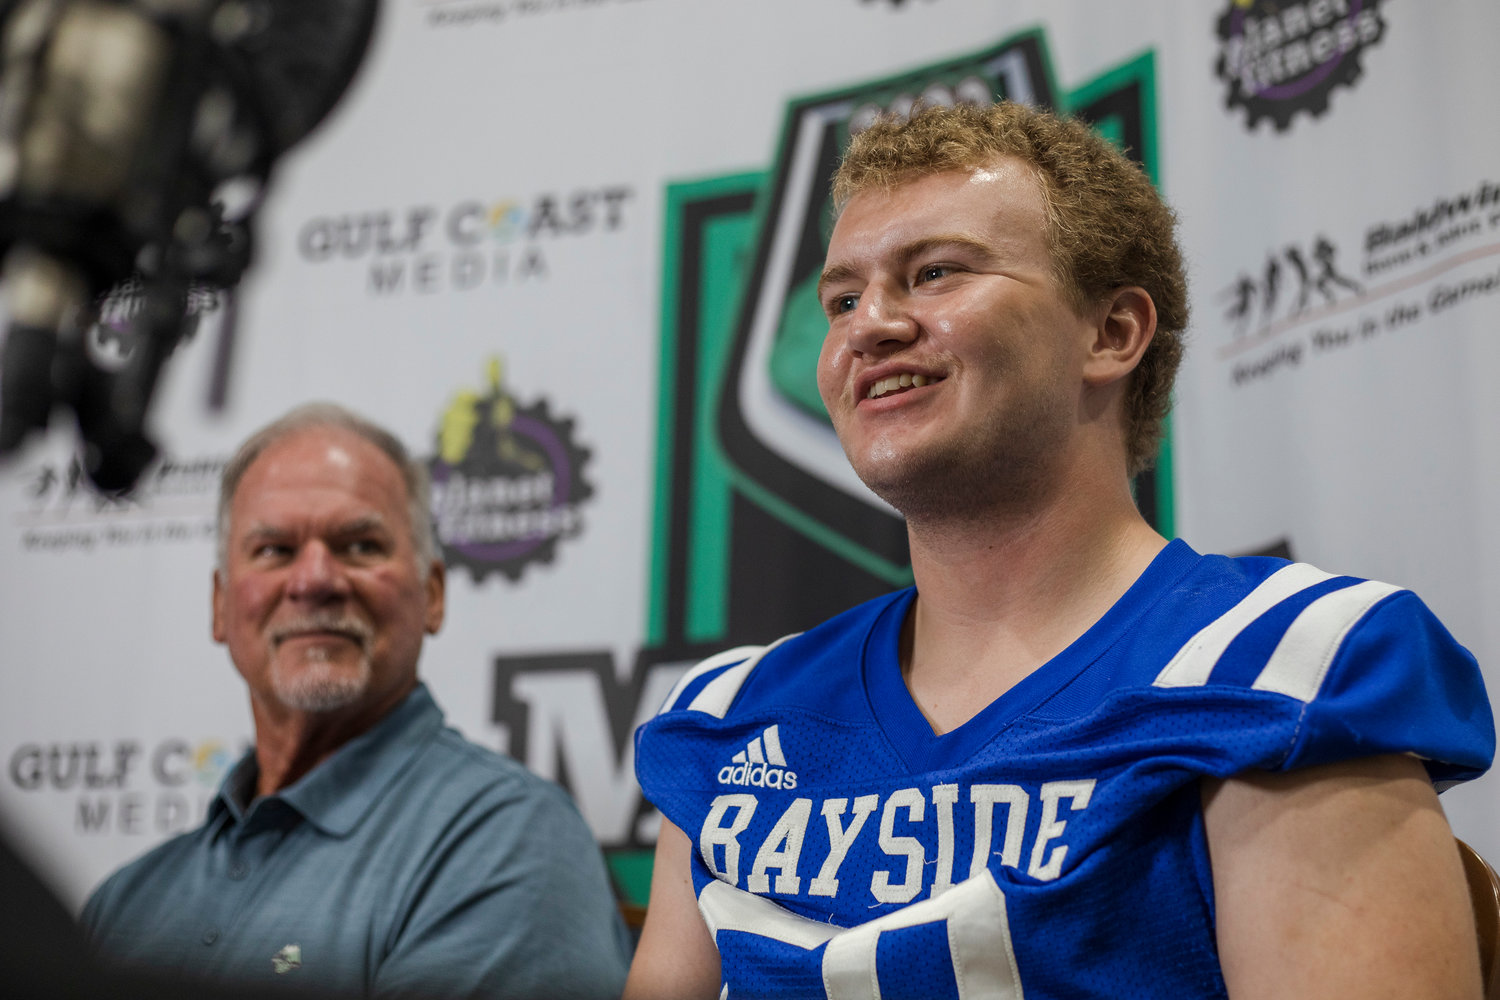 Bayside Academy's Quinn Taylor responds to a question during the first-ever Gulf Coast Media Day event at the Orange Beach Event Center Tuesday, Aug. 16.